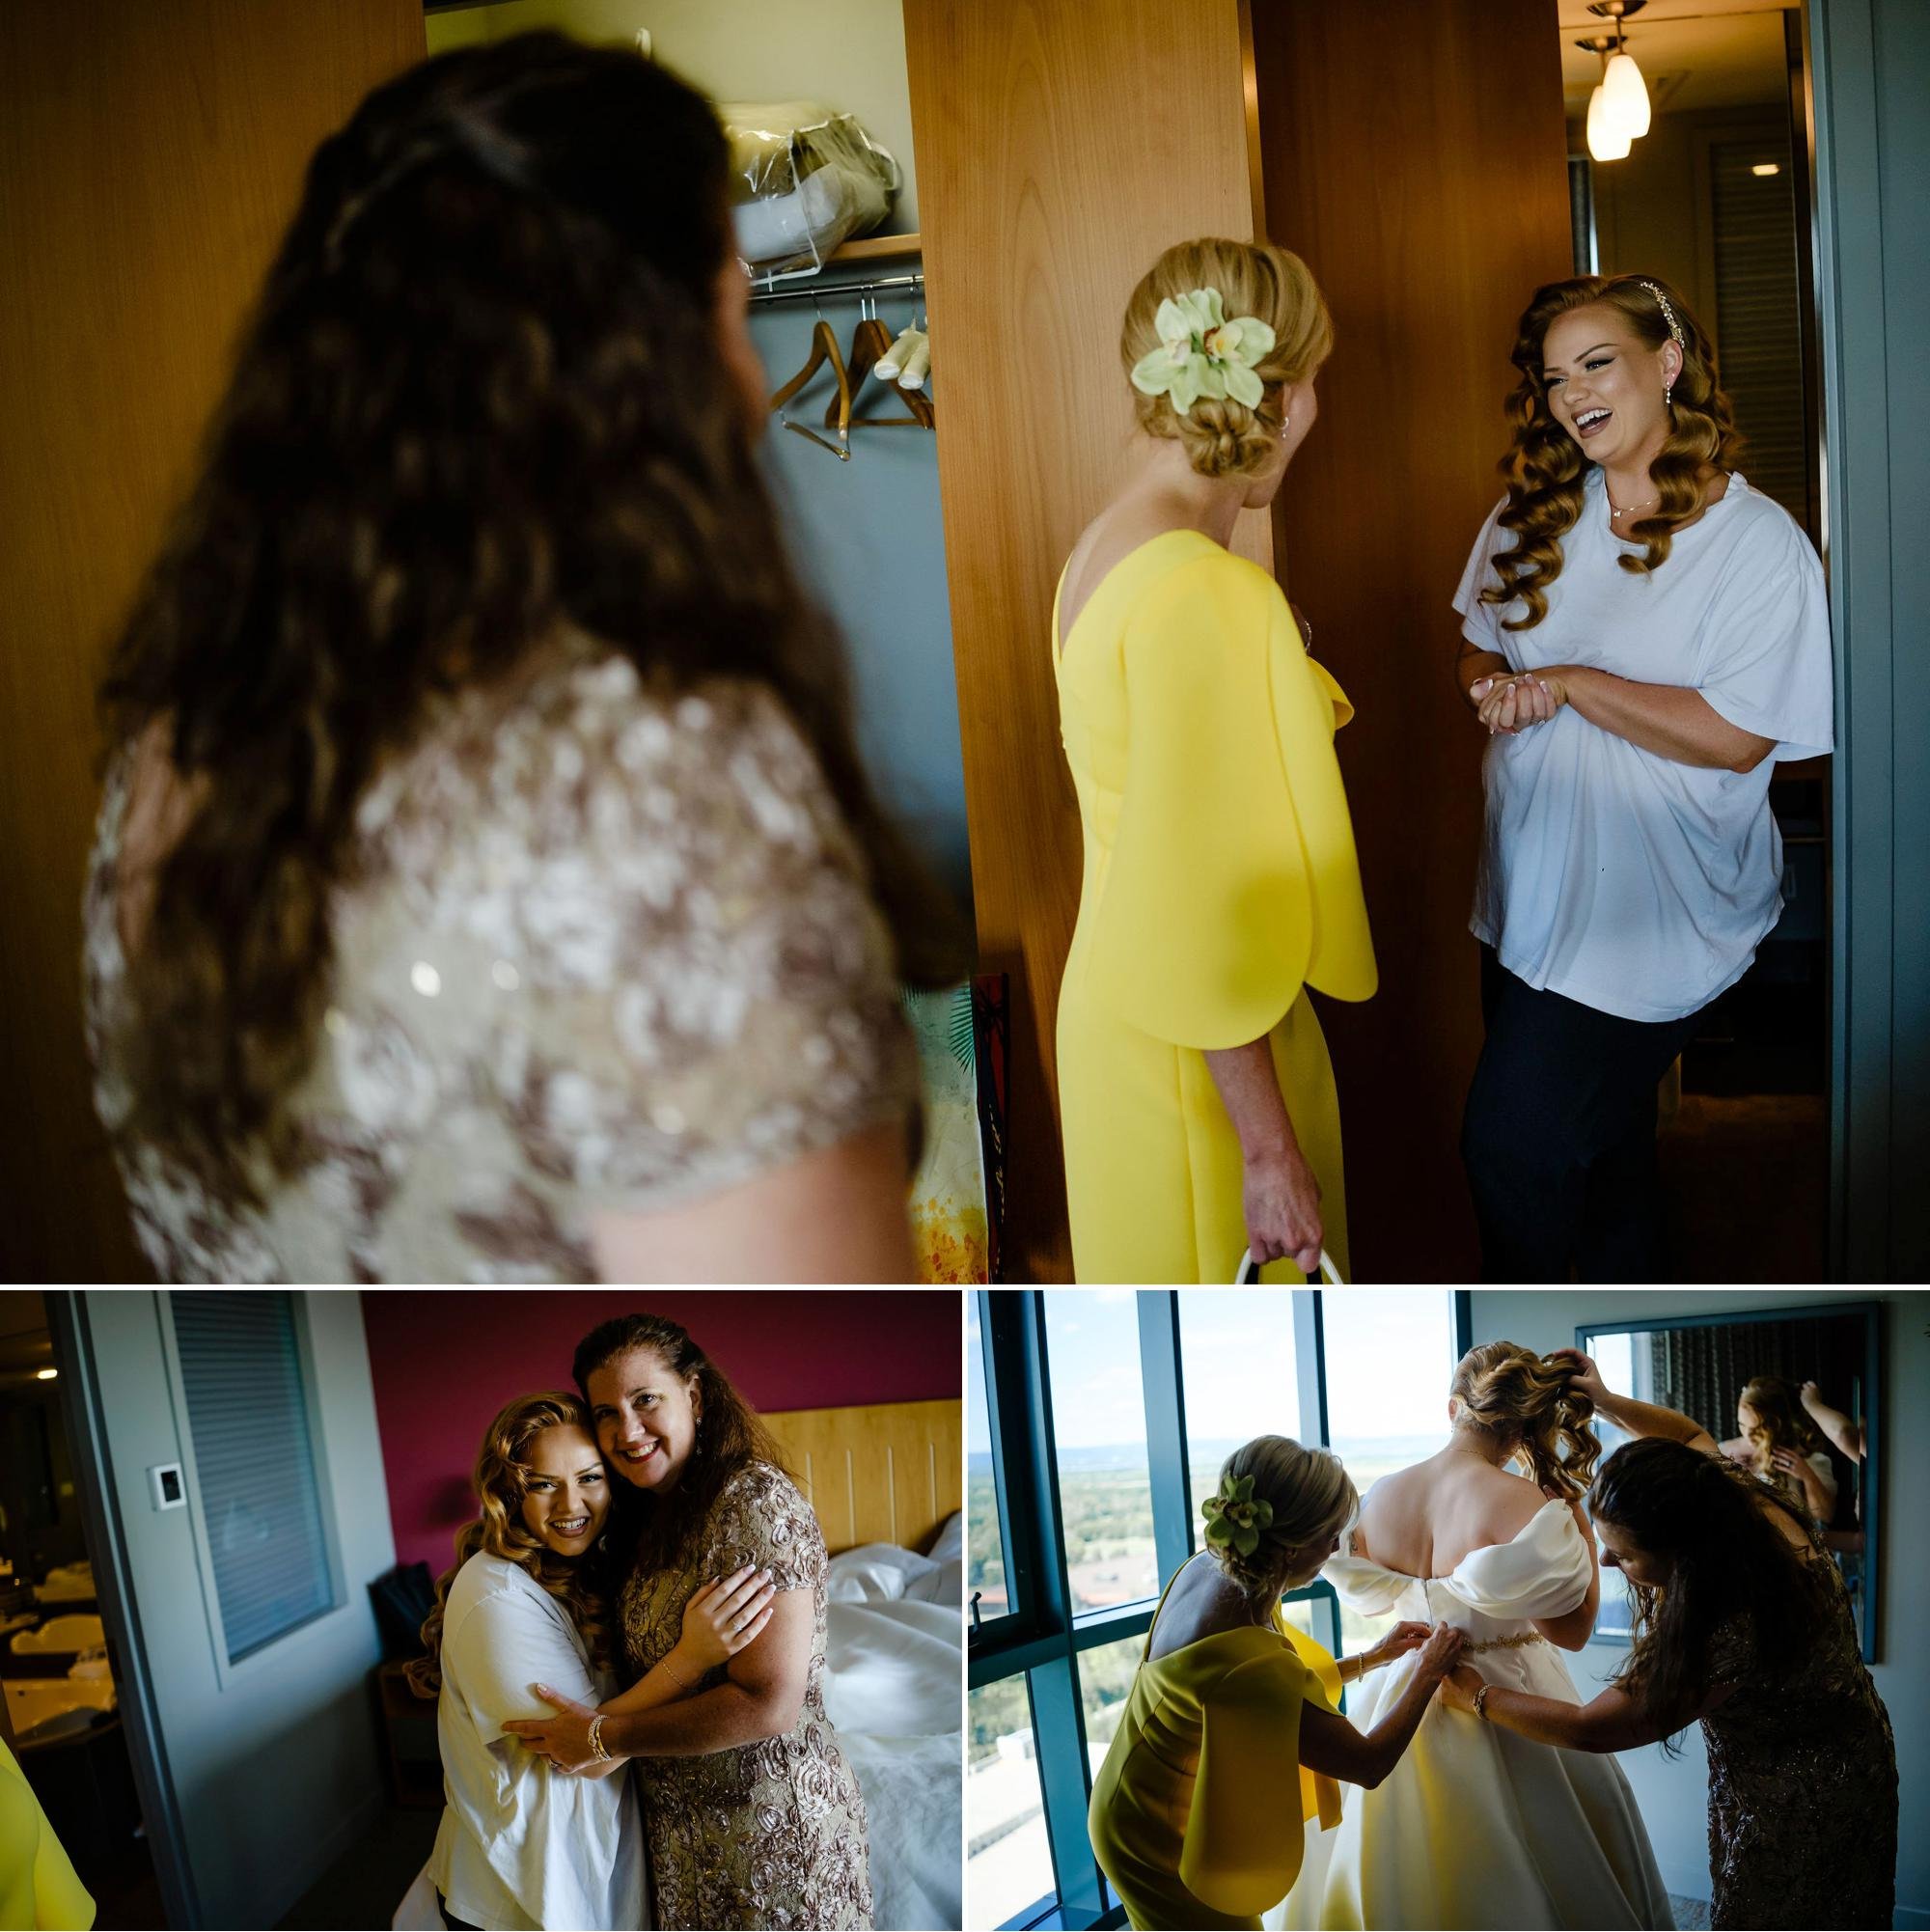 photos of a bride getting ready for her wedding at the Brookstreet hotel